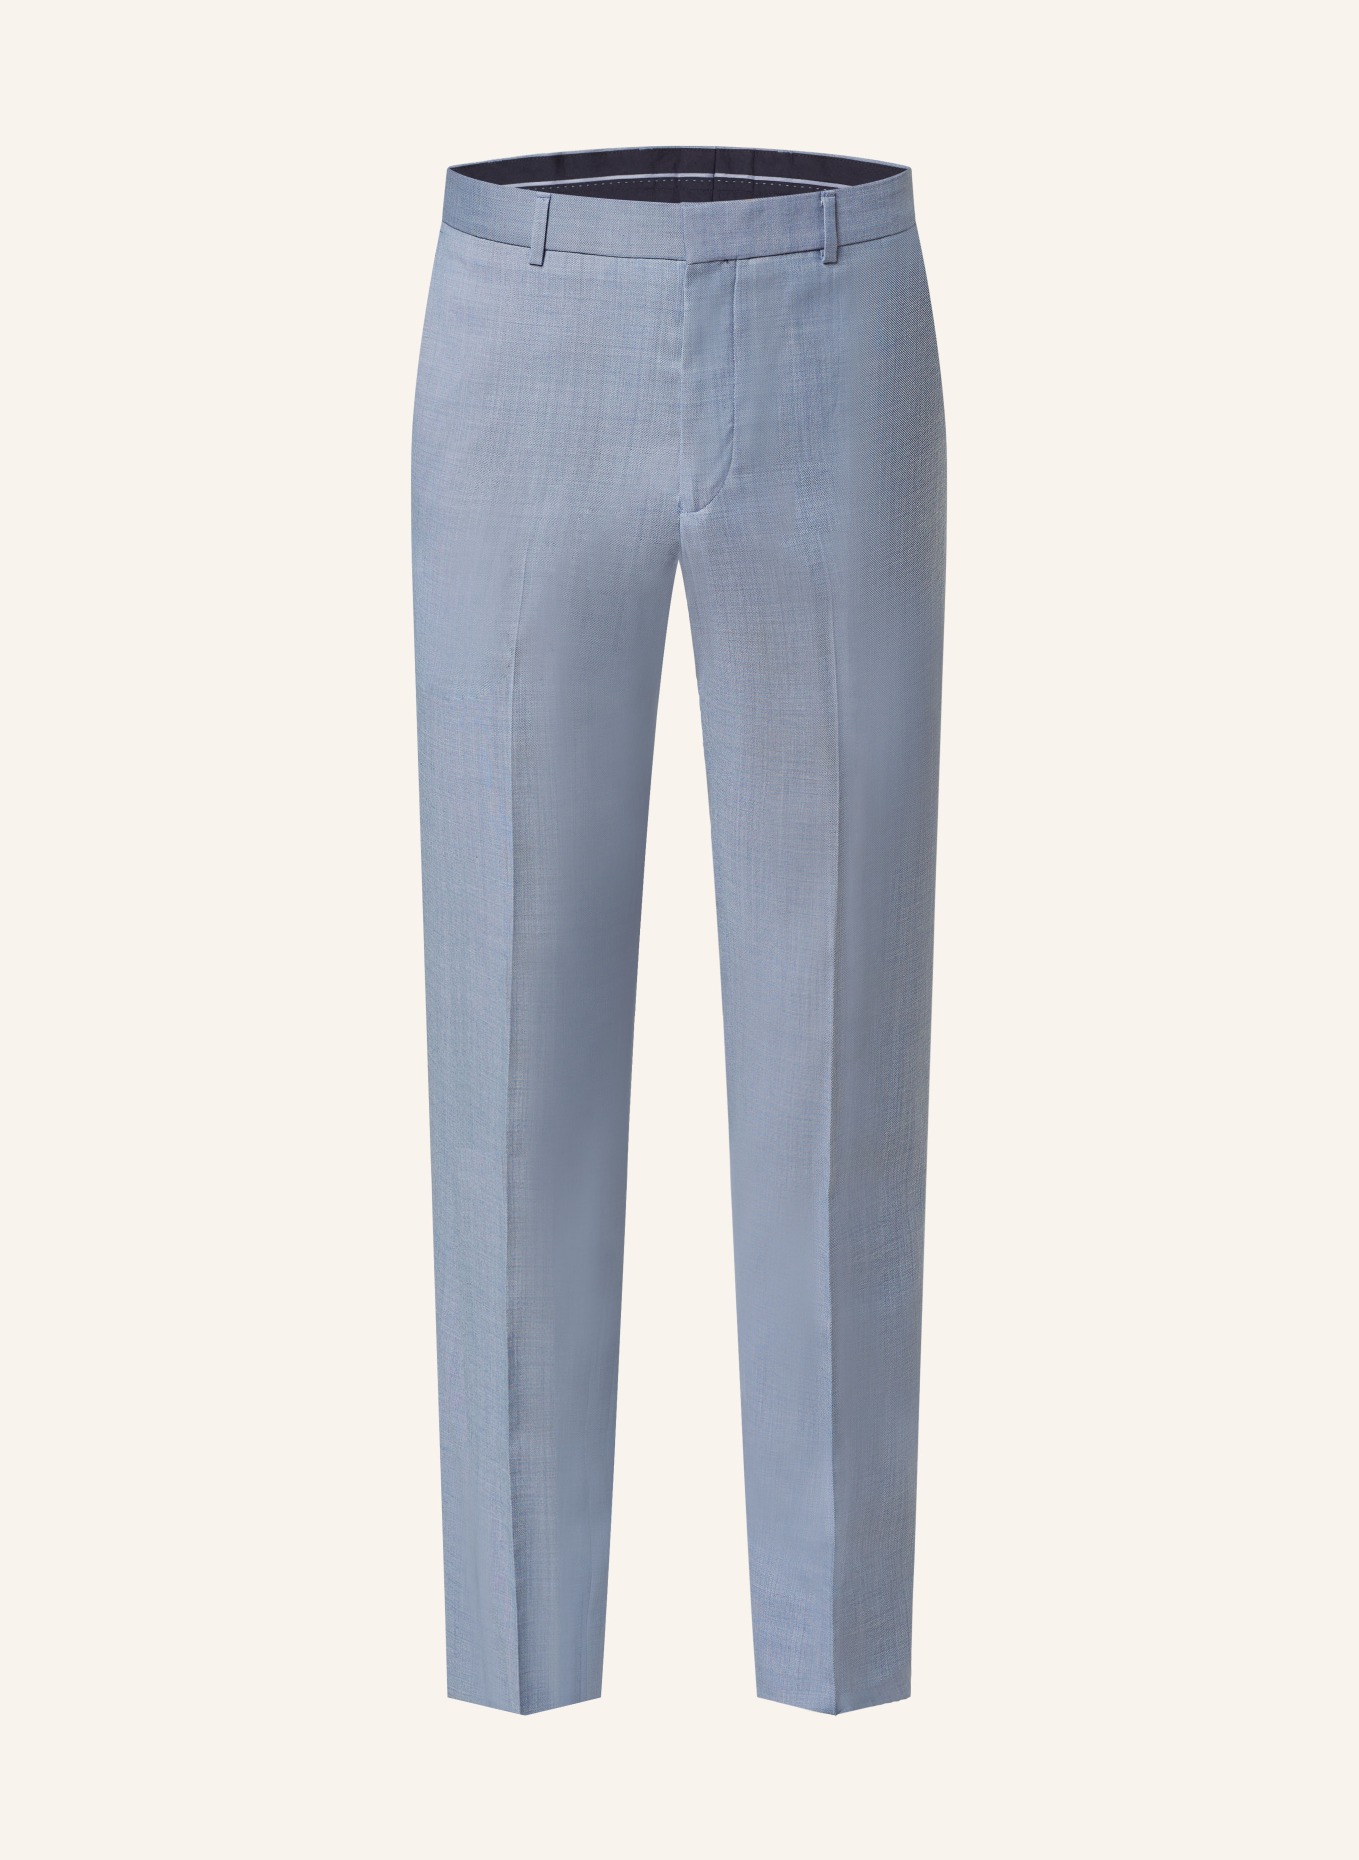 TED BAKER Anzughose ORIONT Slim Fit, Farbe: BLUE BLUE (Bild 1)